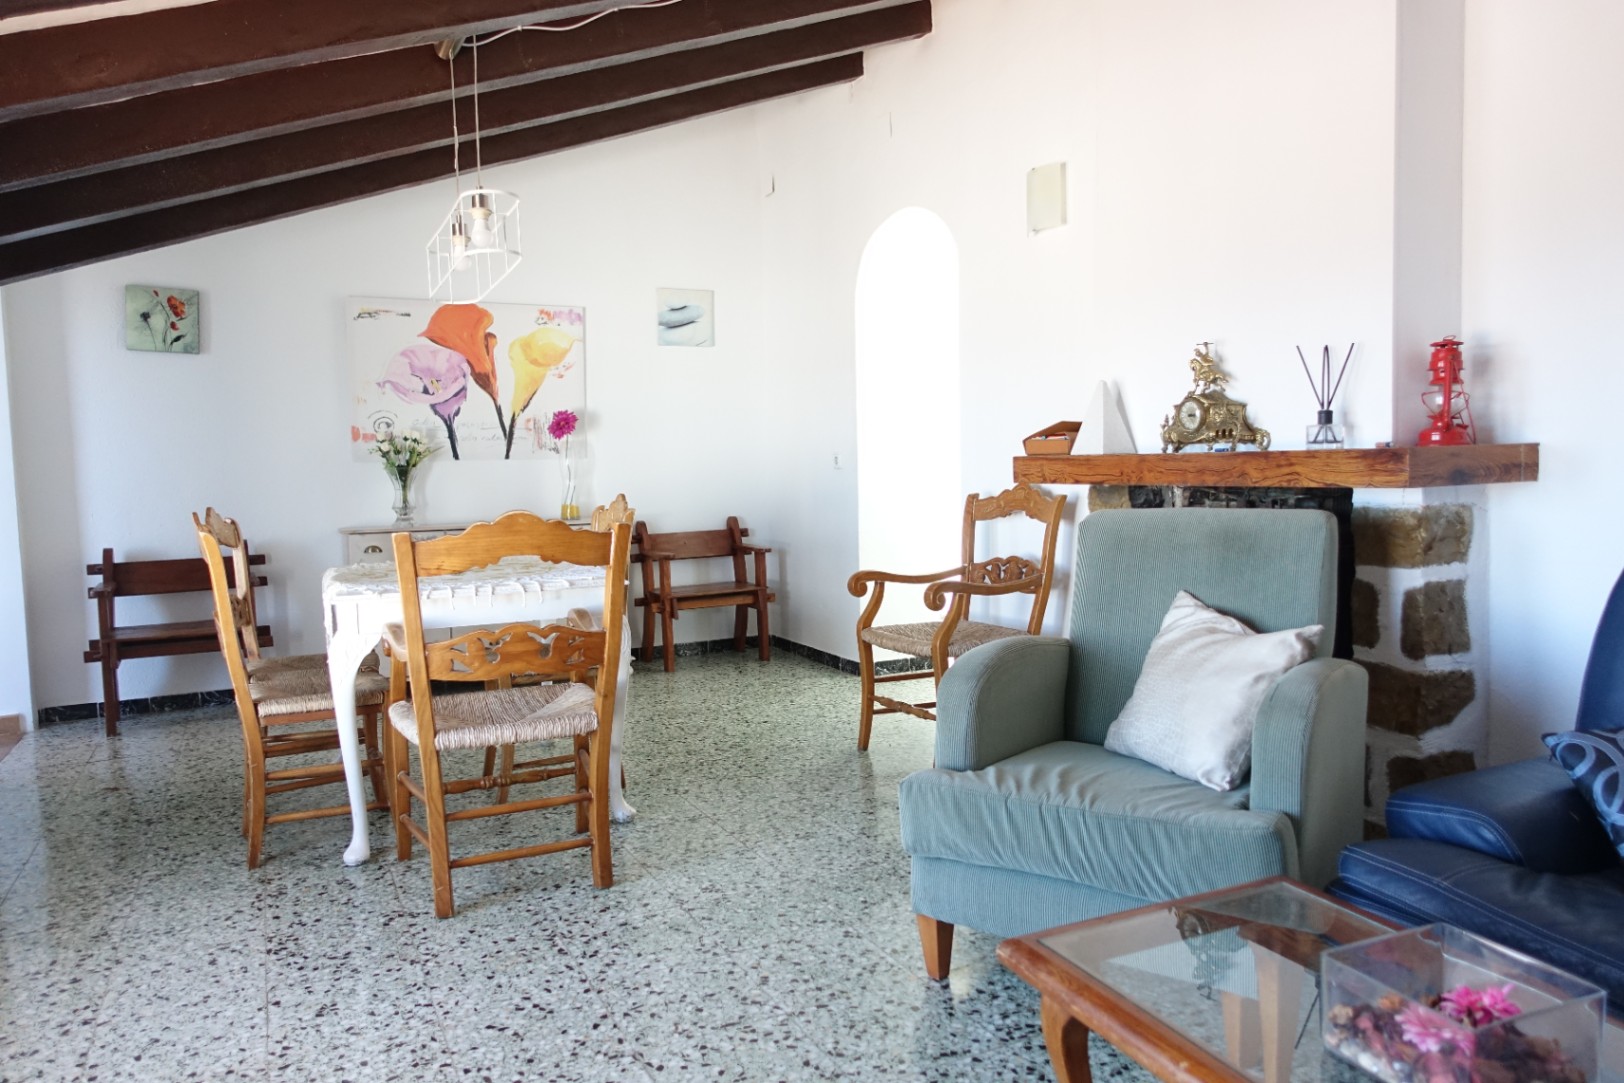 Located in Benissa, this cottage features a private pool.